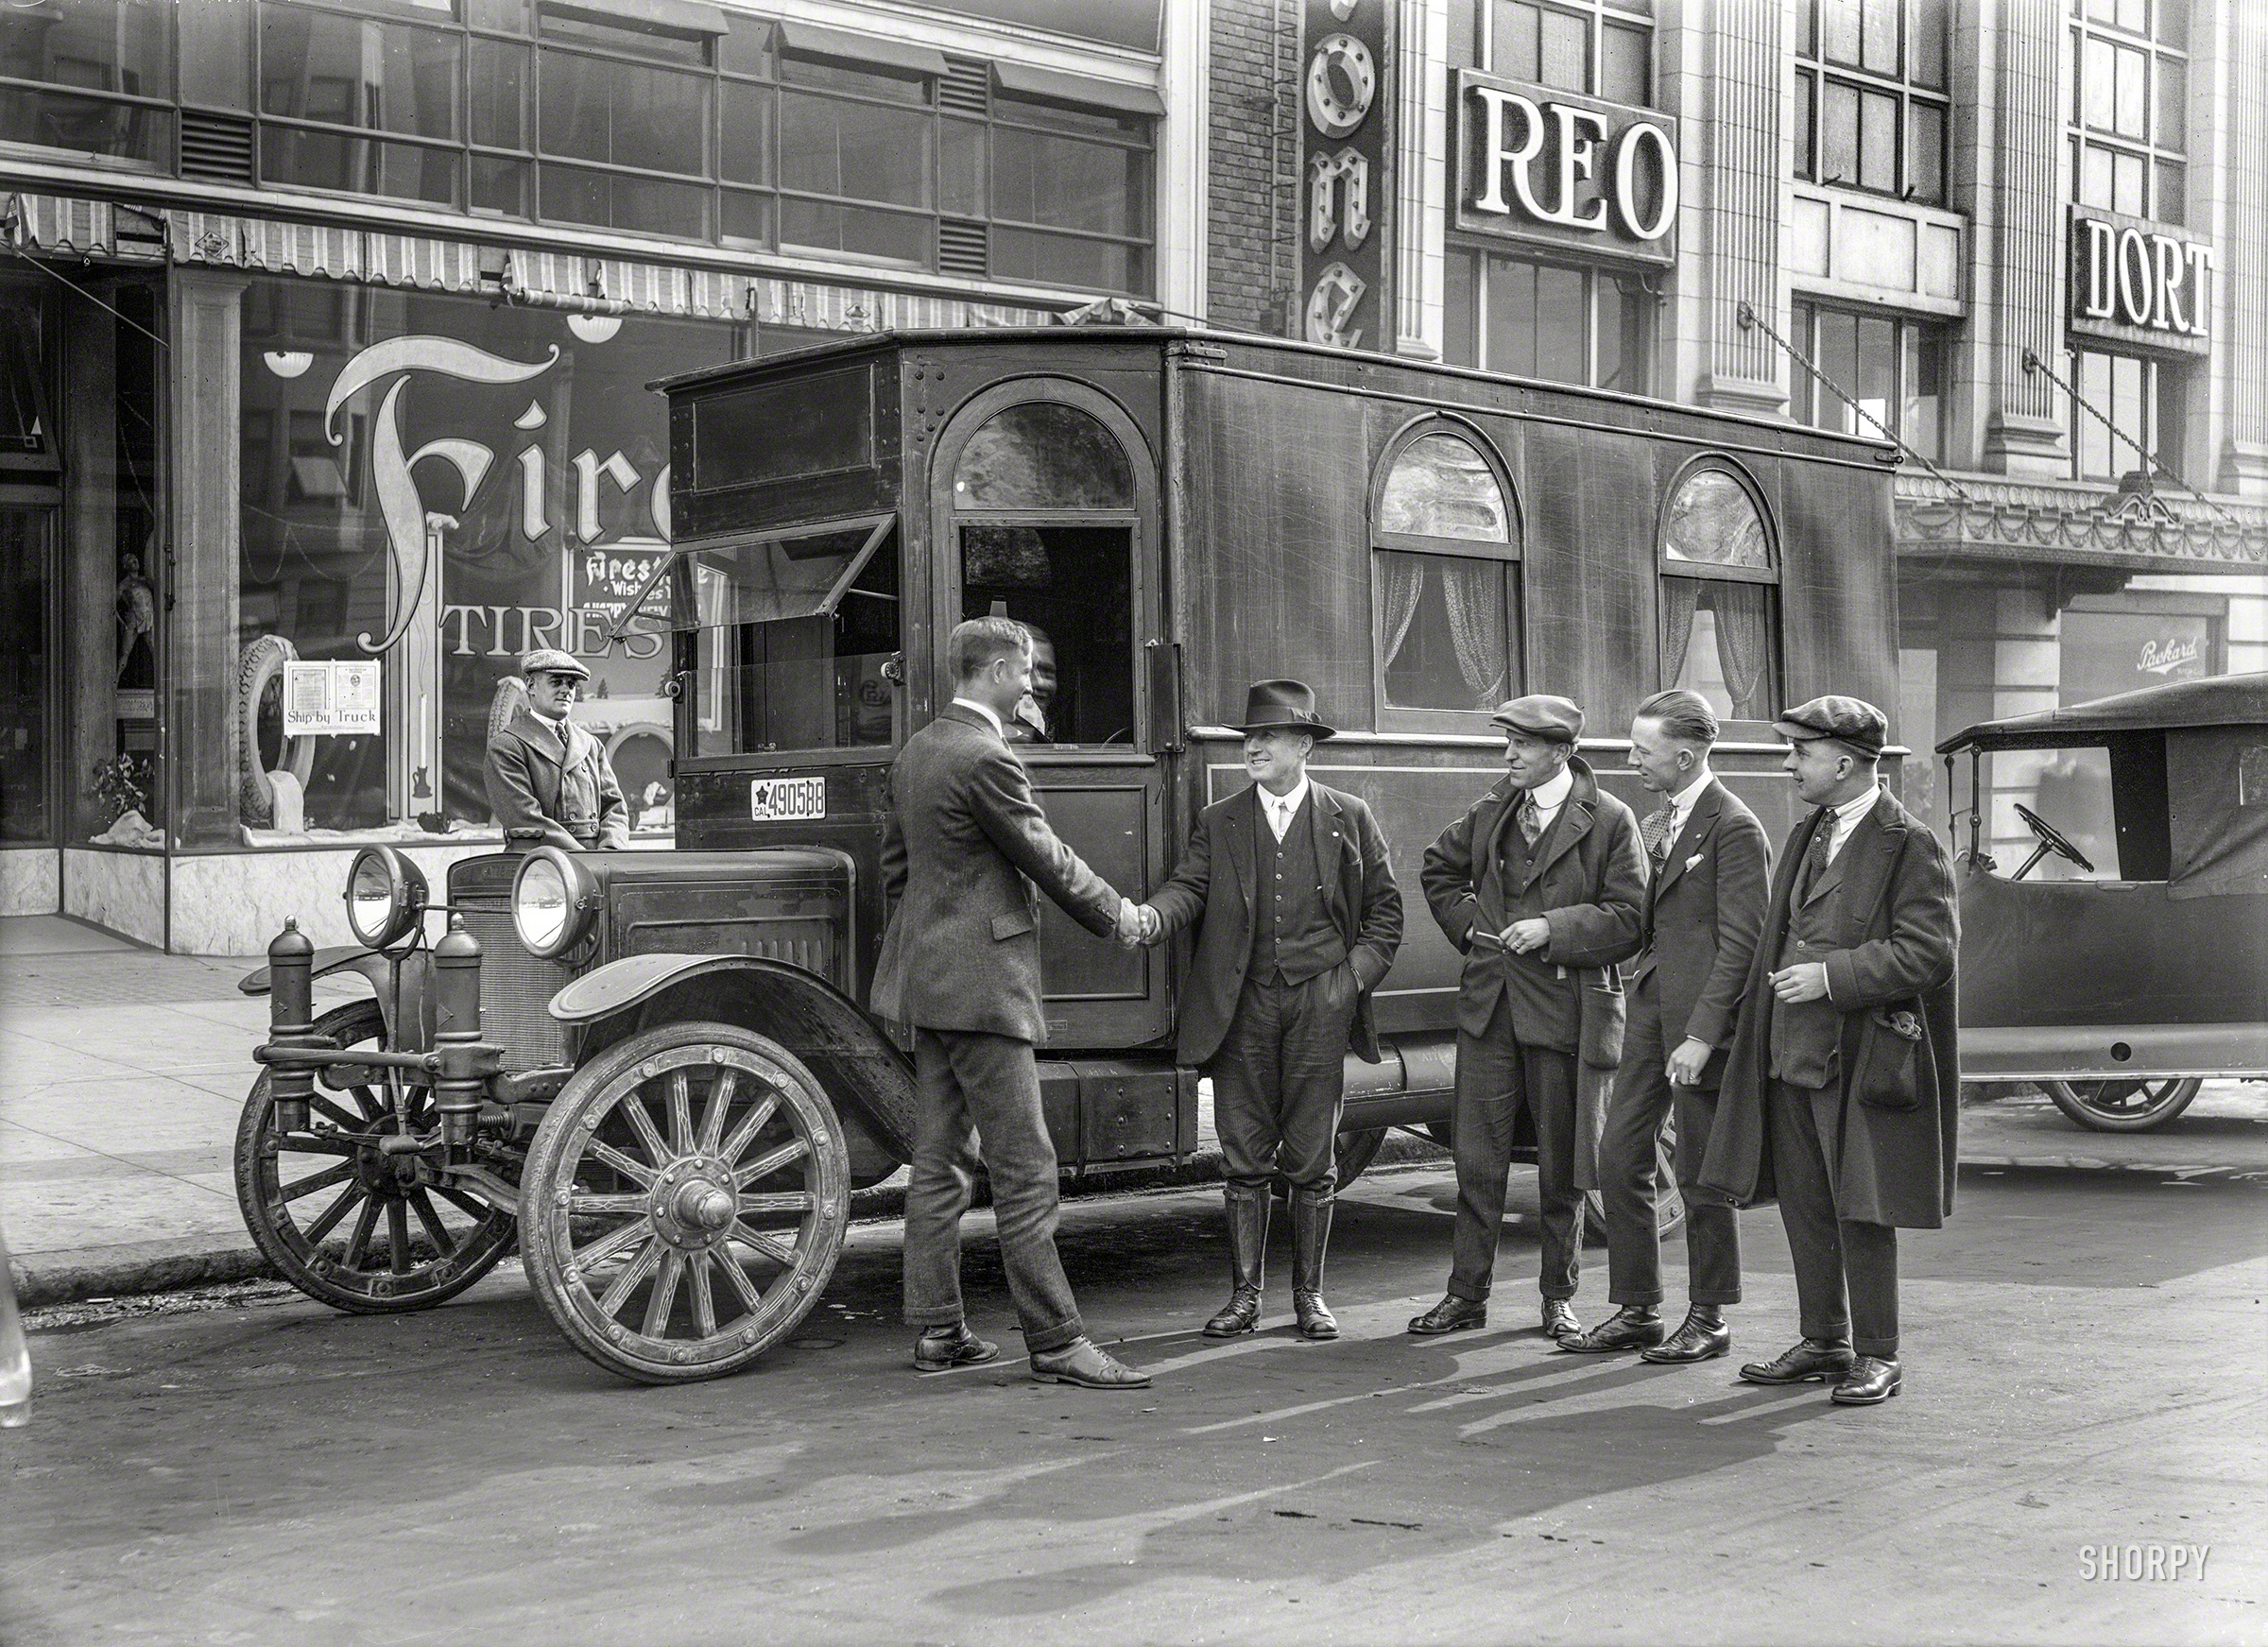 San Francisco circa 1919. "Bus" is all it says on the sleeve of this 5x7 glass negative showing a motor home on an Atterbury truck chassis. In the Firestone display window, it's beginning to look a little like New Year's. View full size.